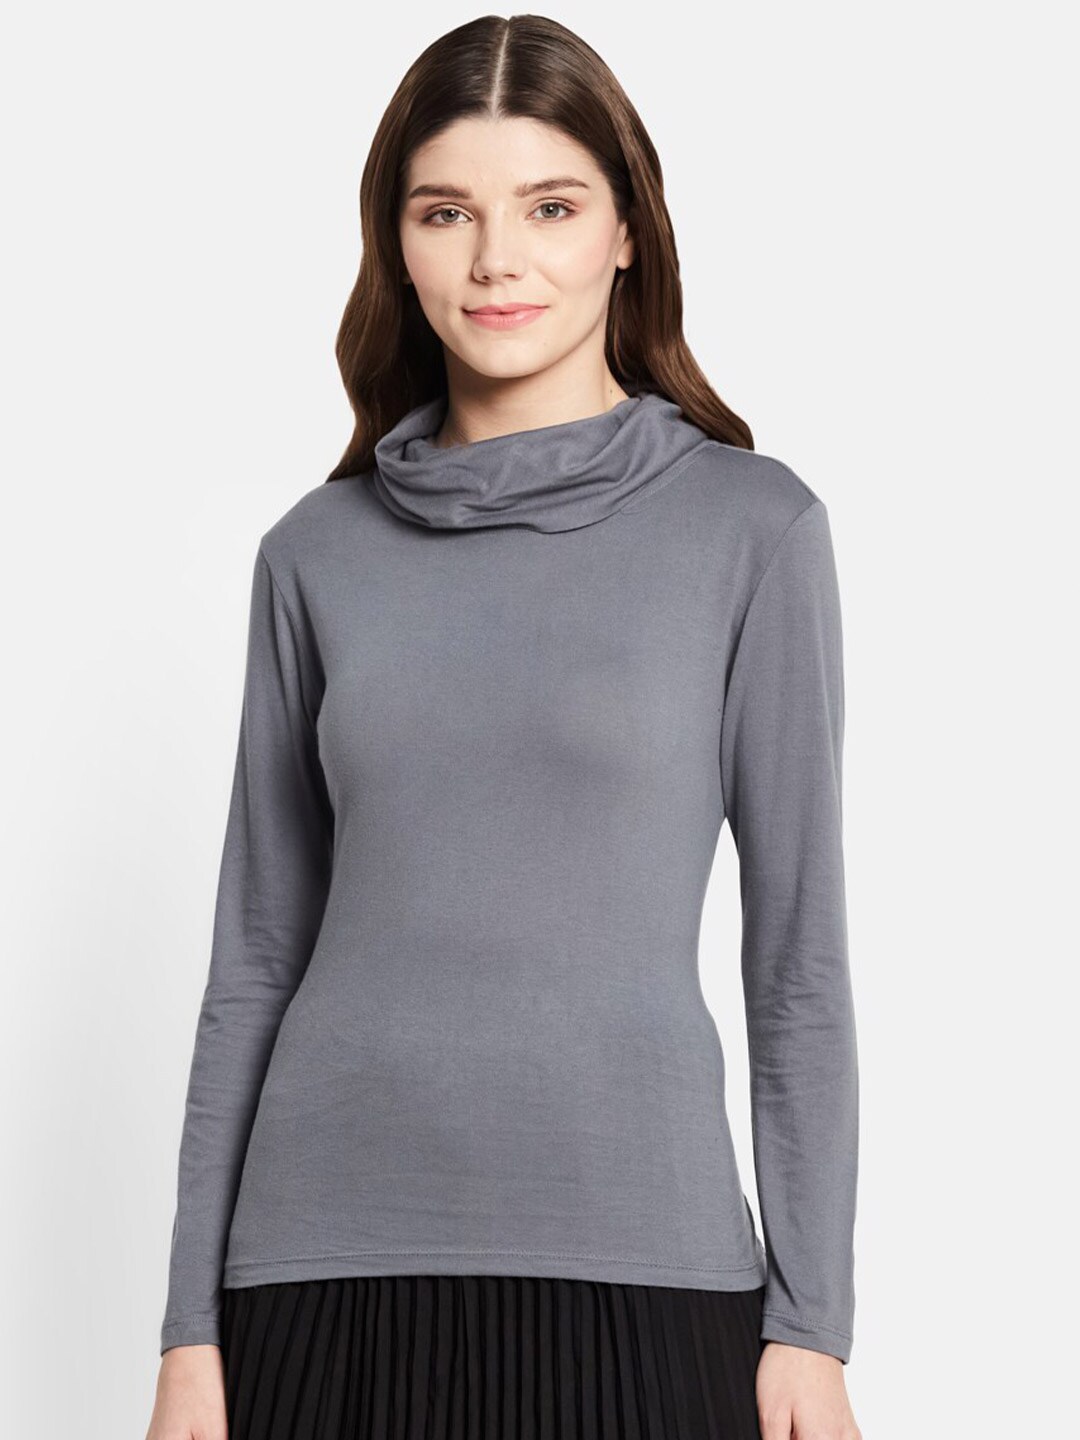 UNMADE Grey Top Price in India